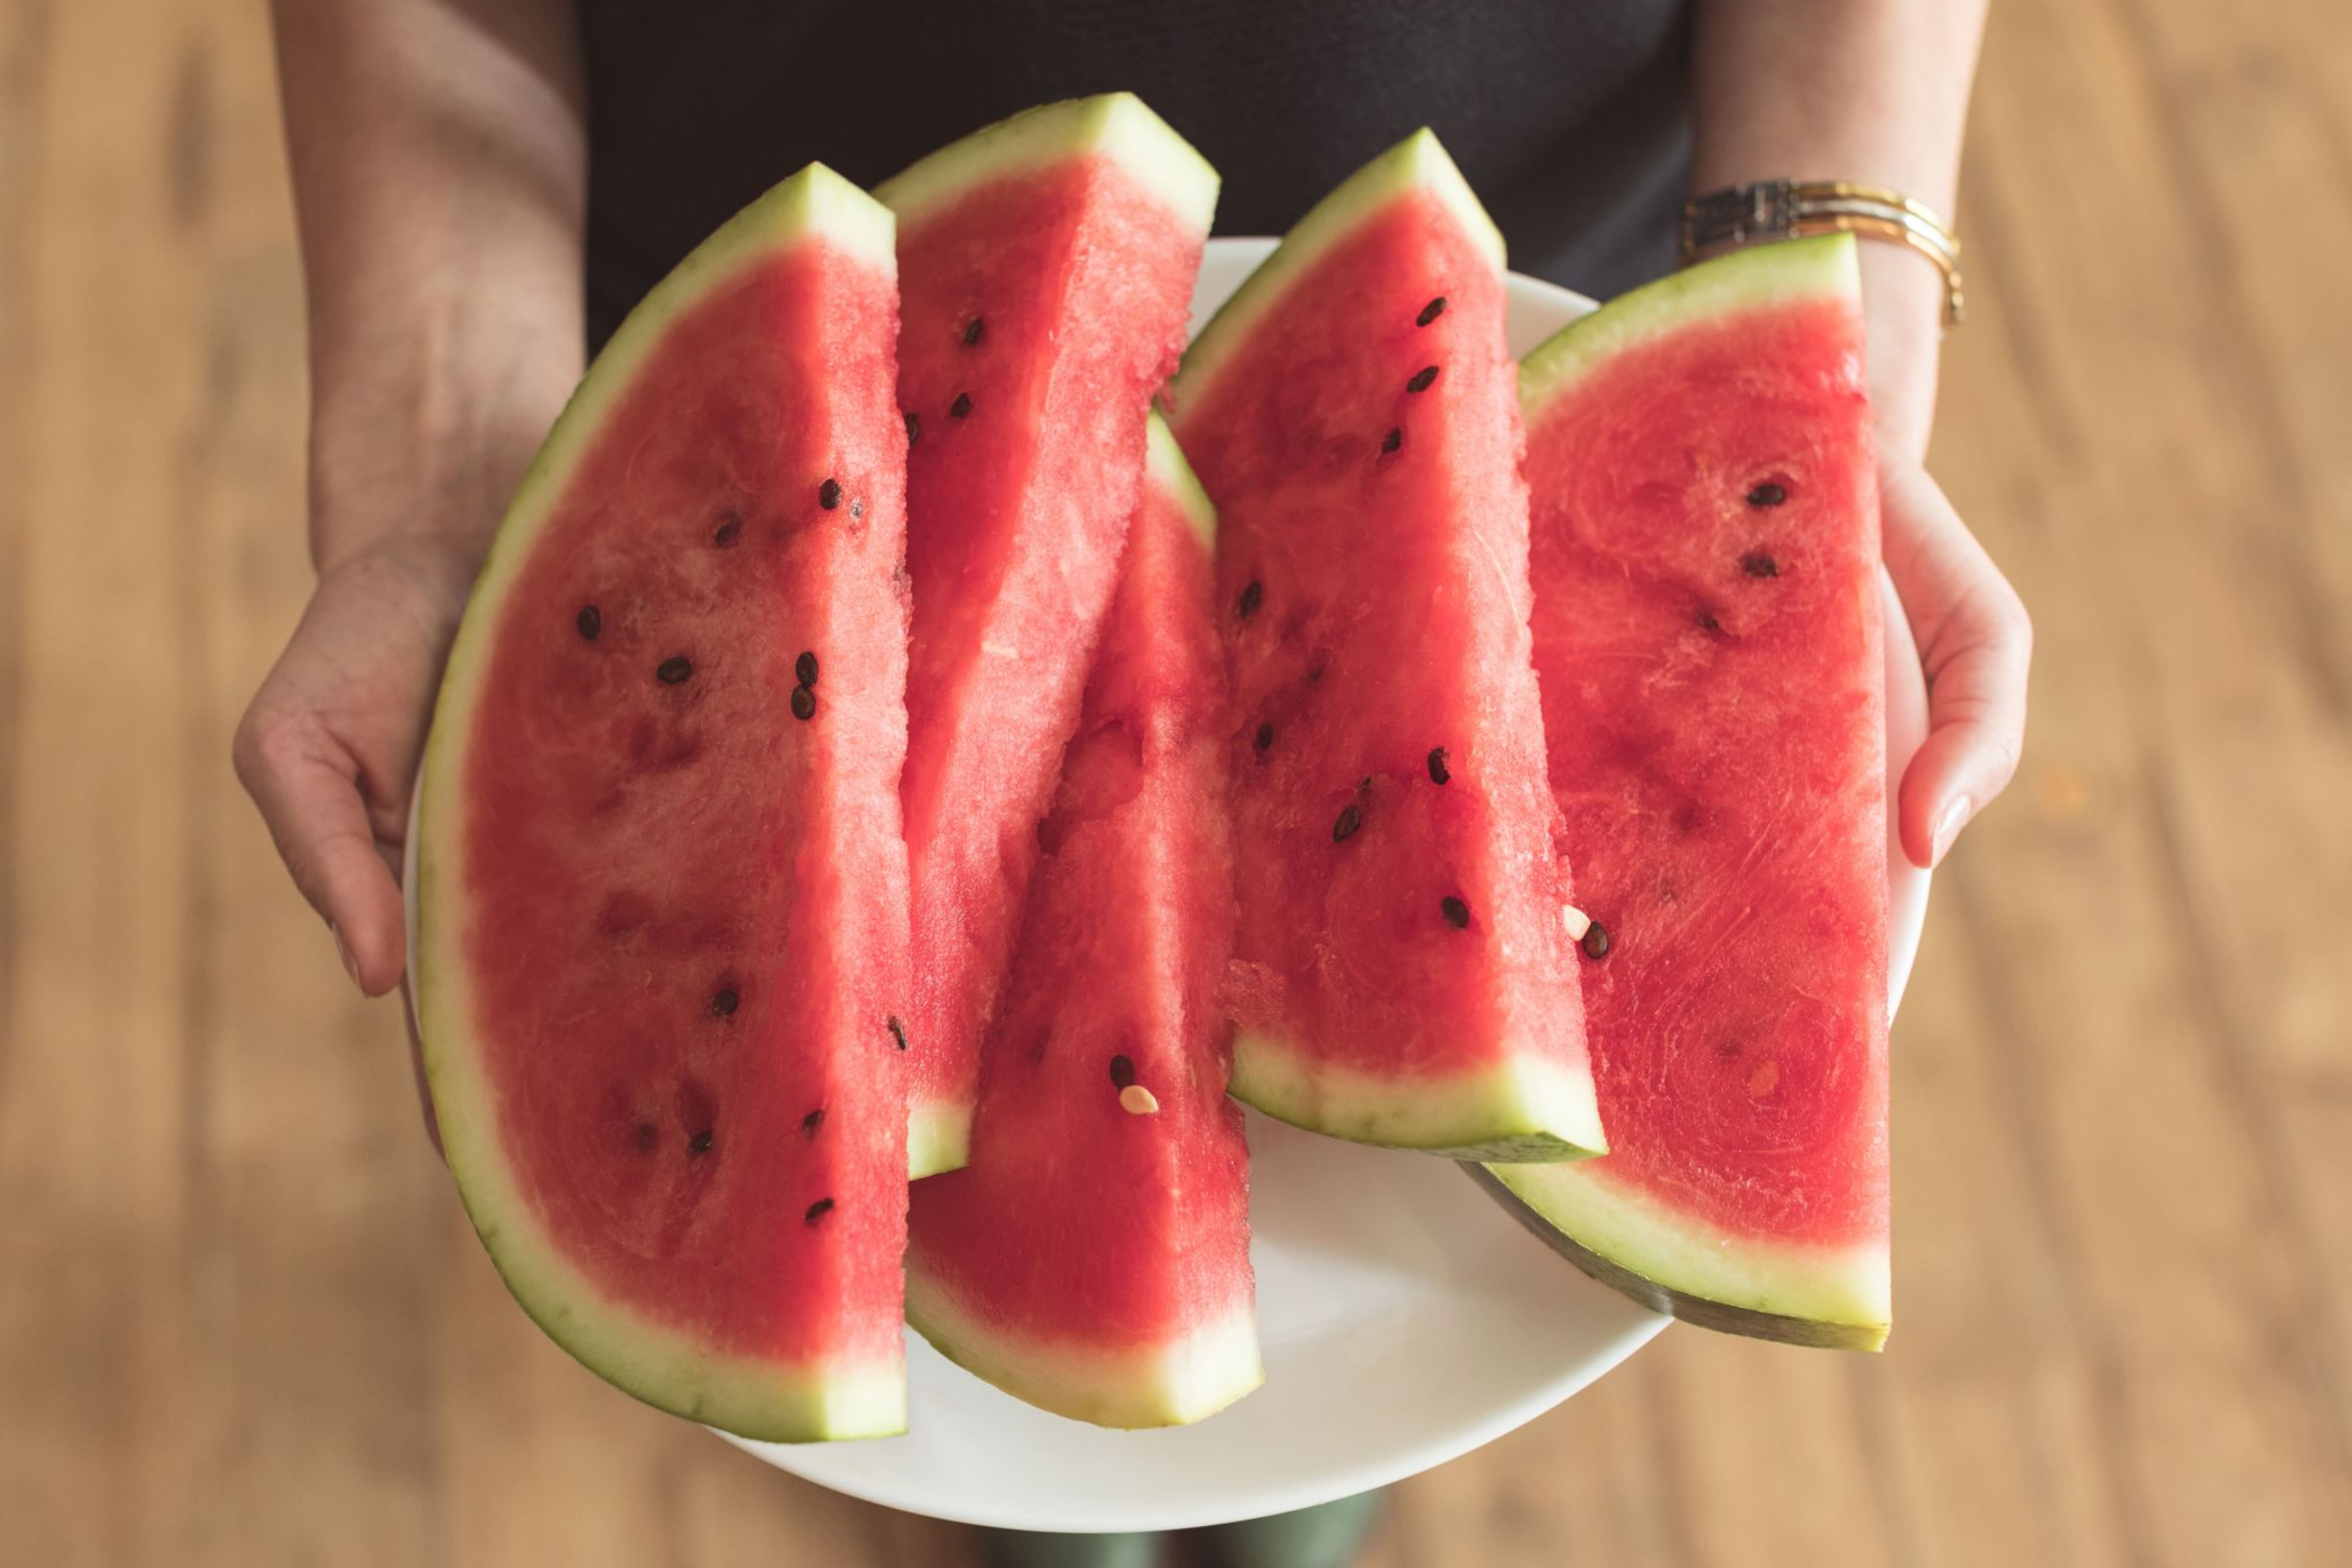 Assessing Cut or Sliced Watermelon Signs of Spoilage